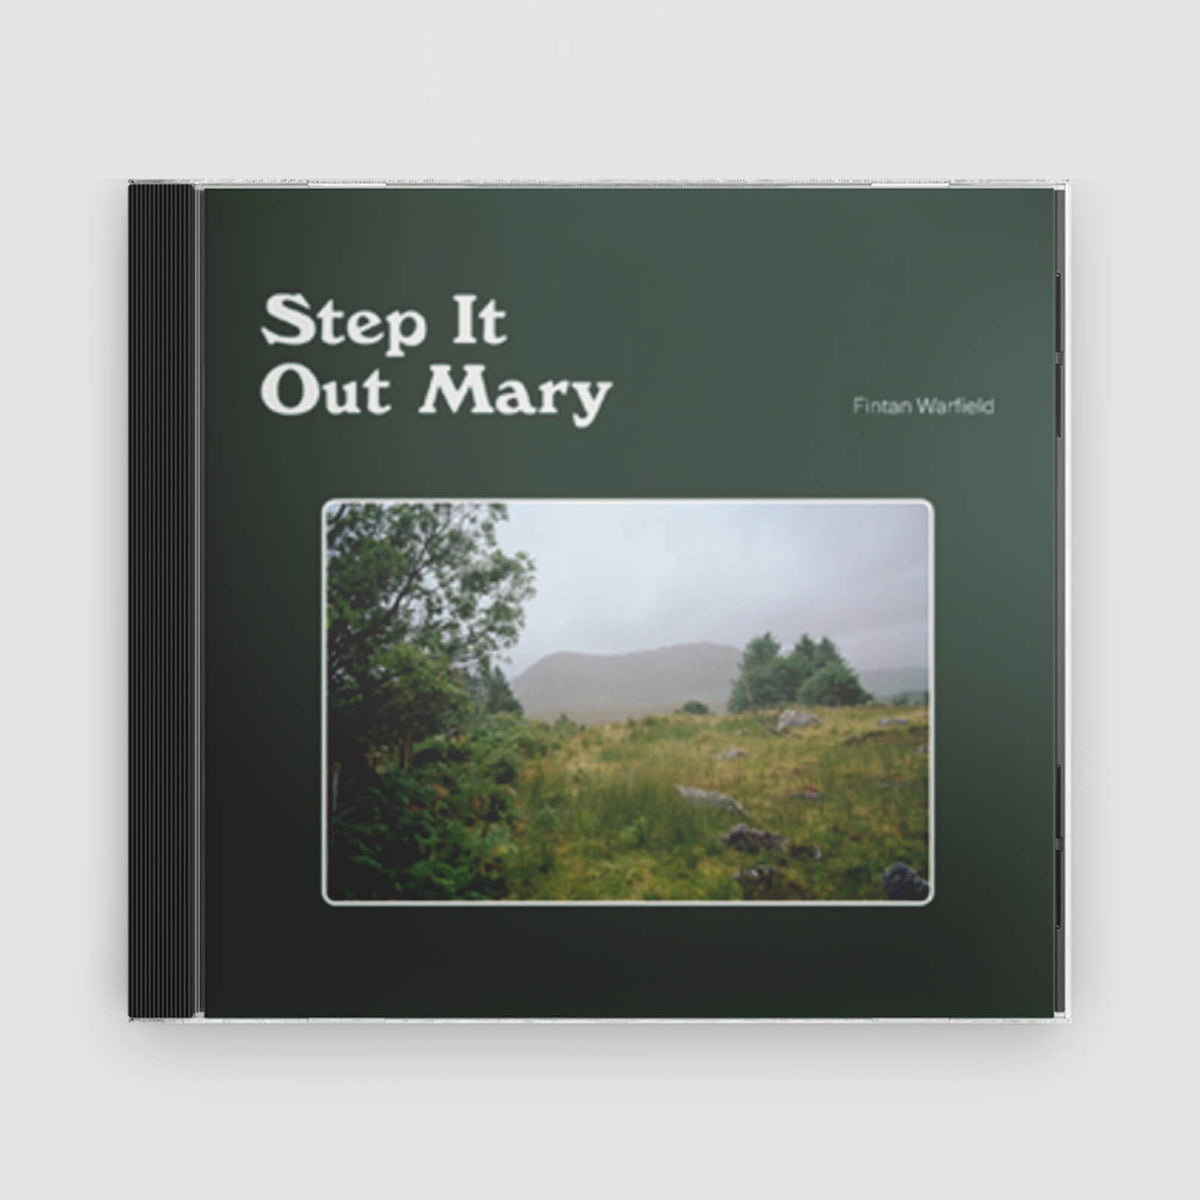 Fintan Warfield : Step It Out Mary